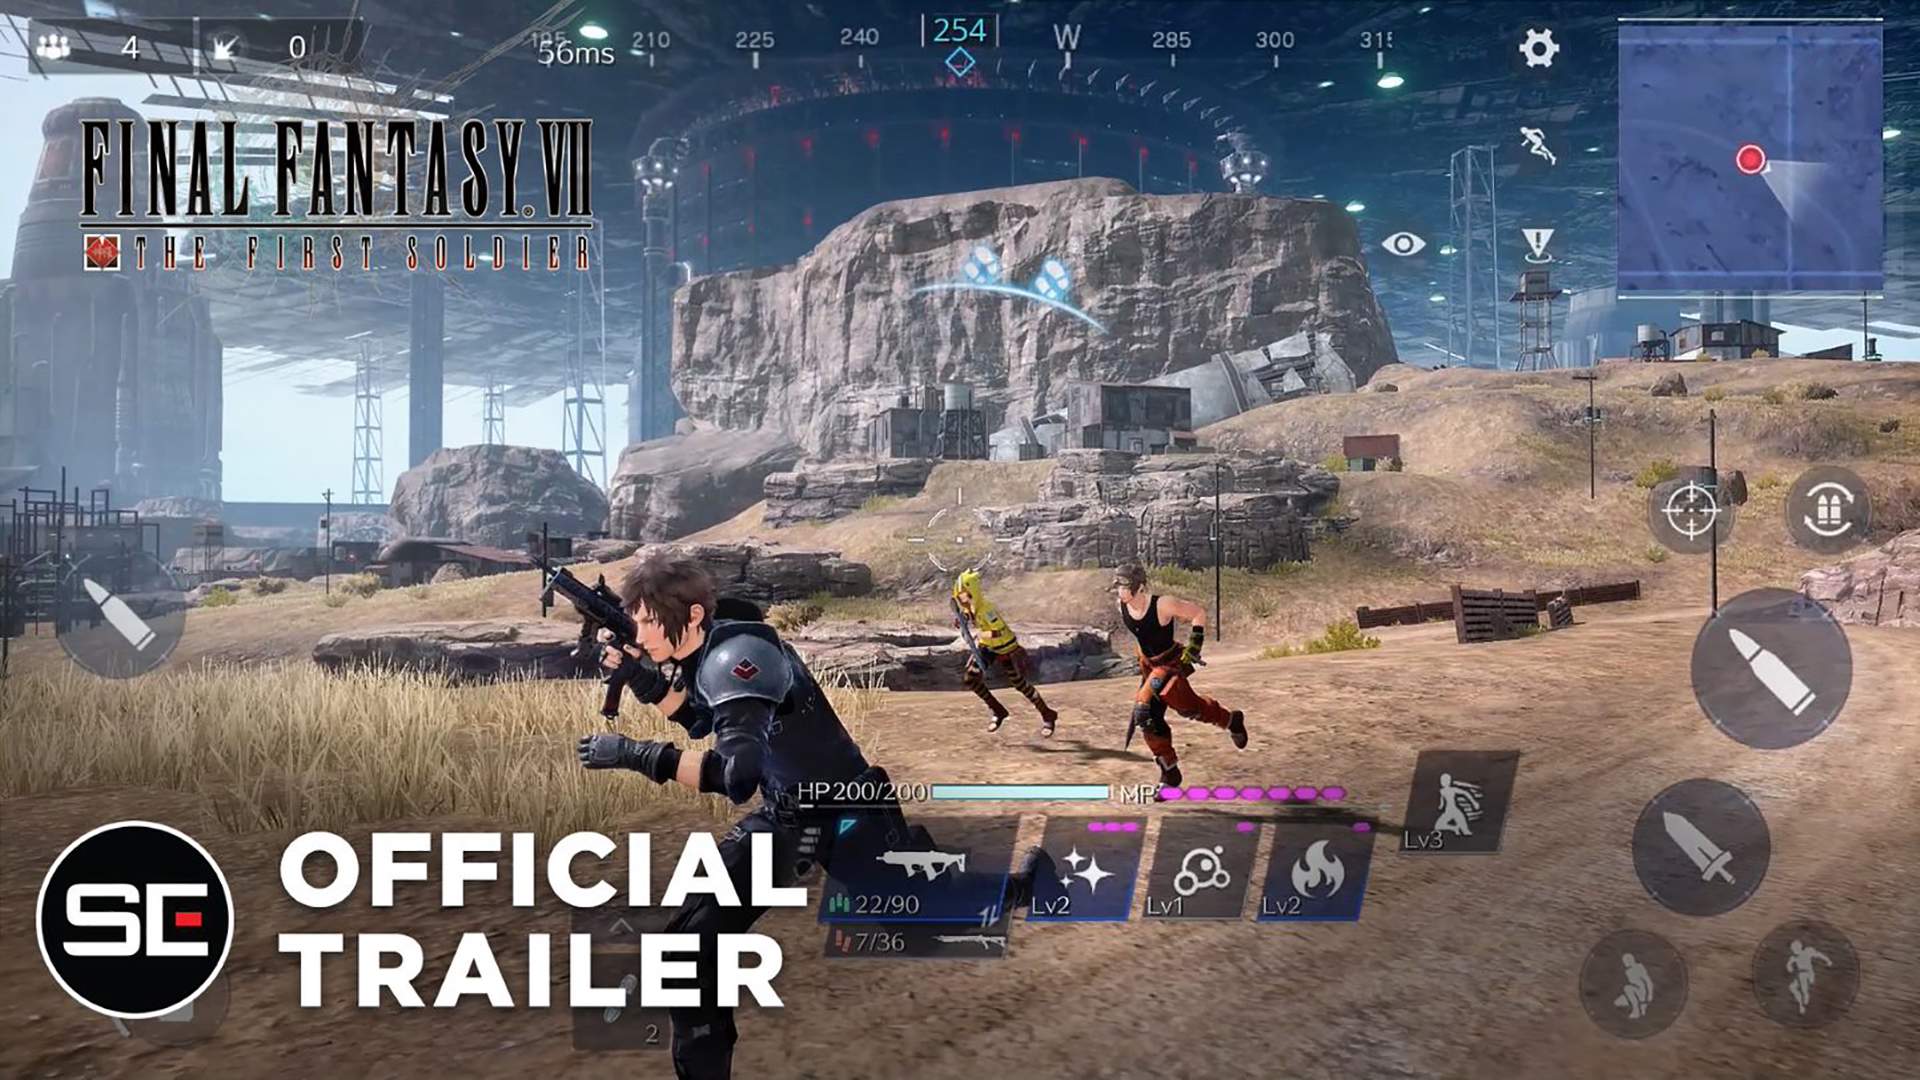 FINAL FANTASY VII THE FIRST SOLDIER | SEP Trailer